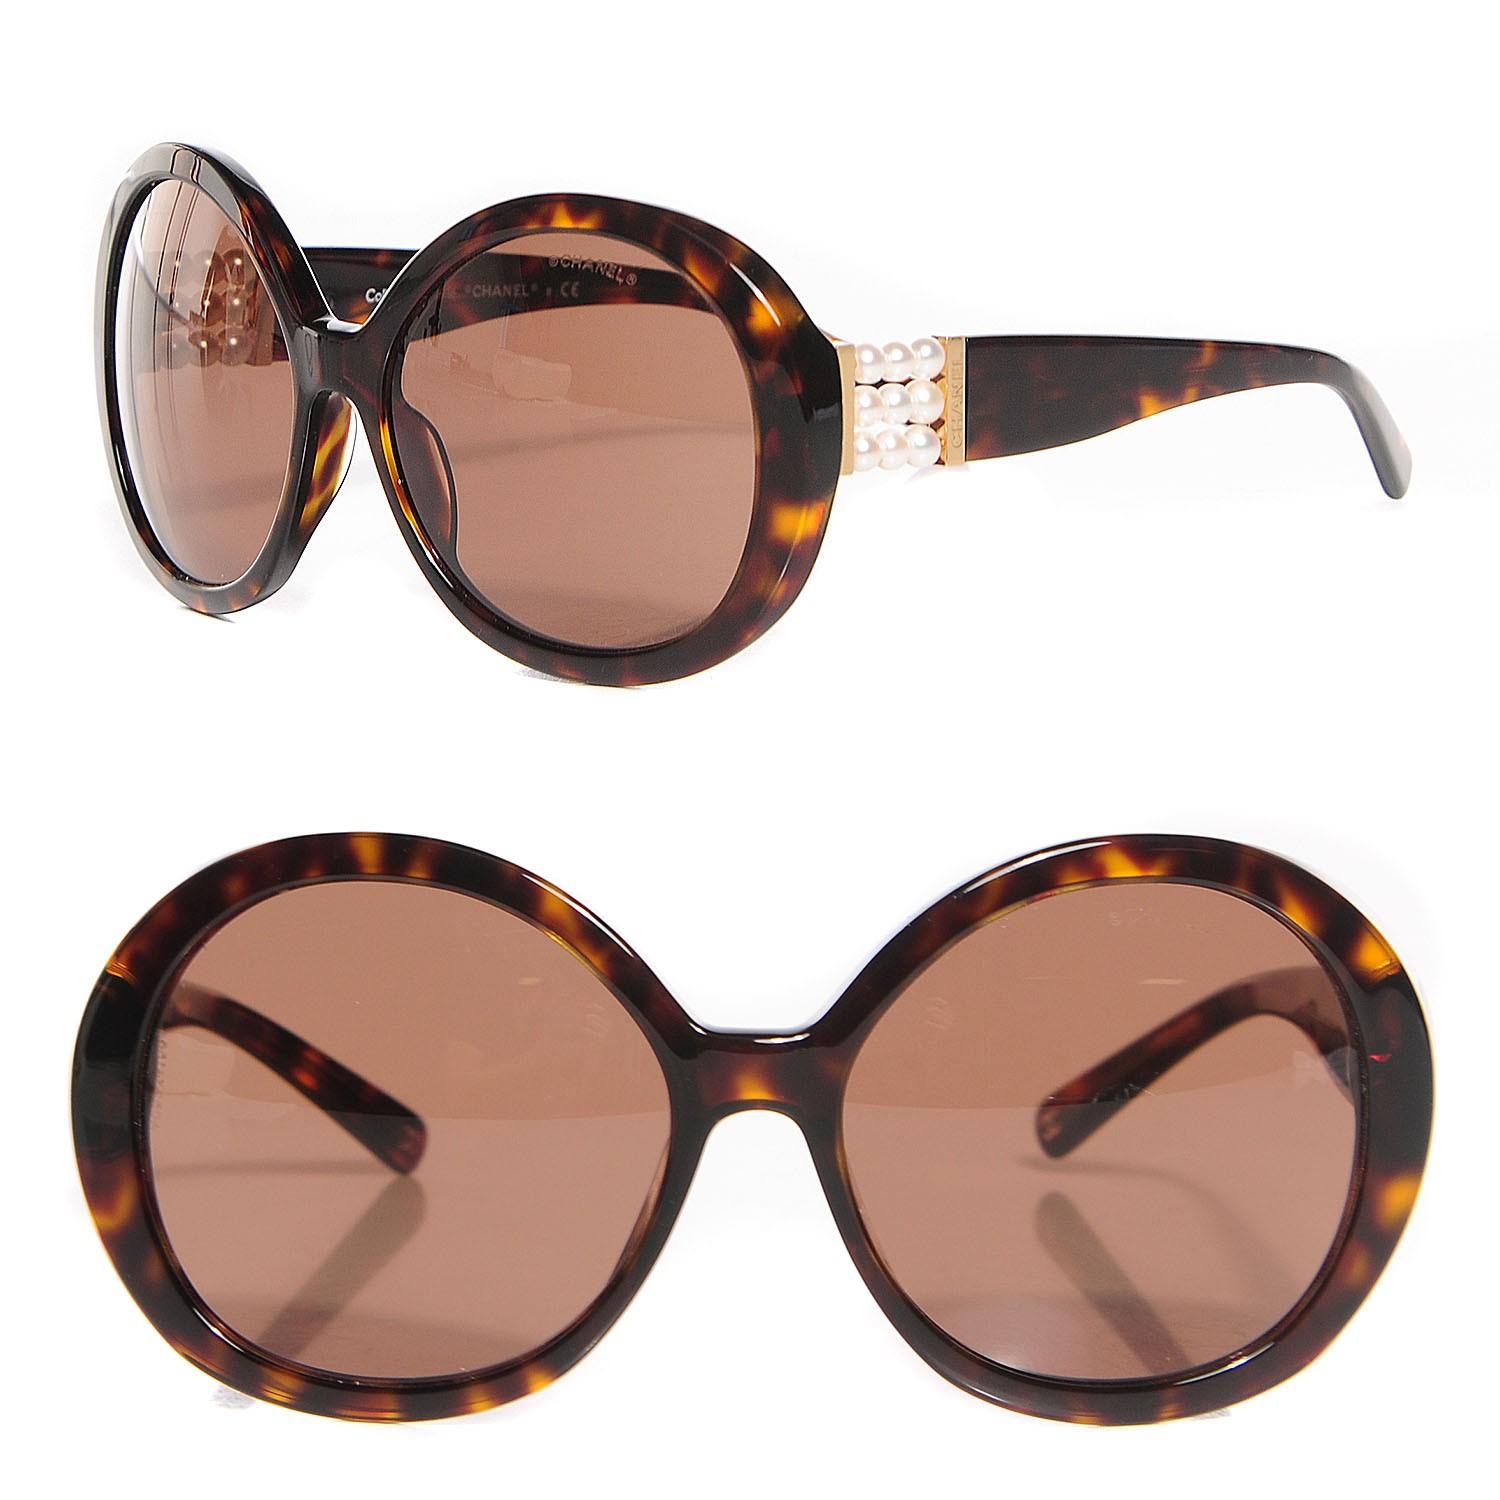 CHANEL Perle Pearl Sunglasses 5159-H Tortise 102805 | FASHIONPHILE